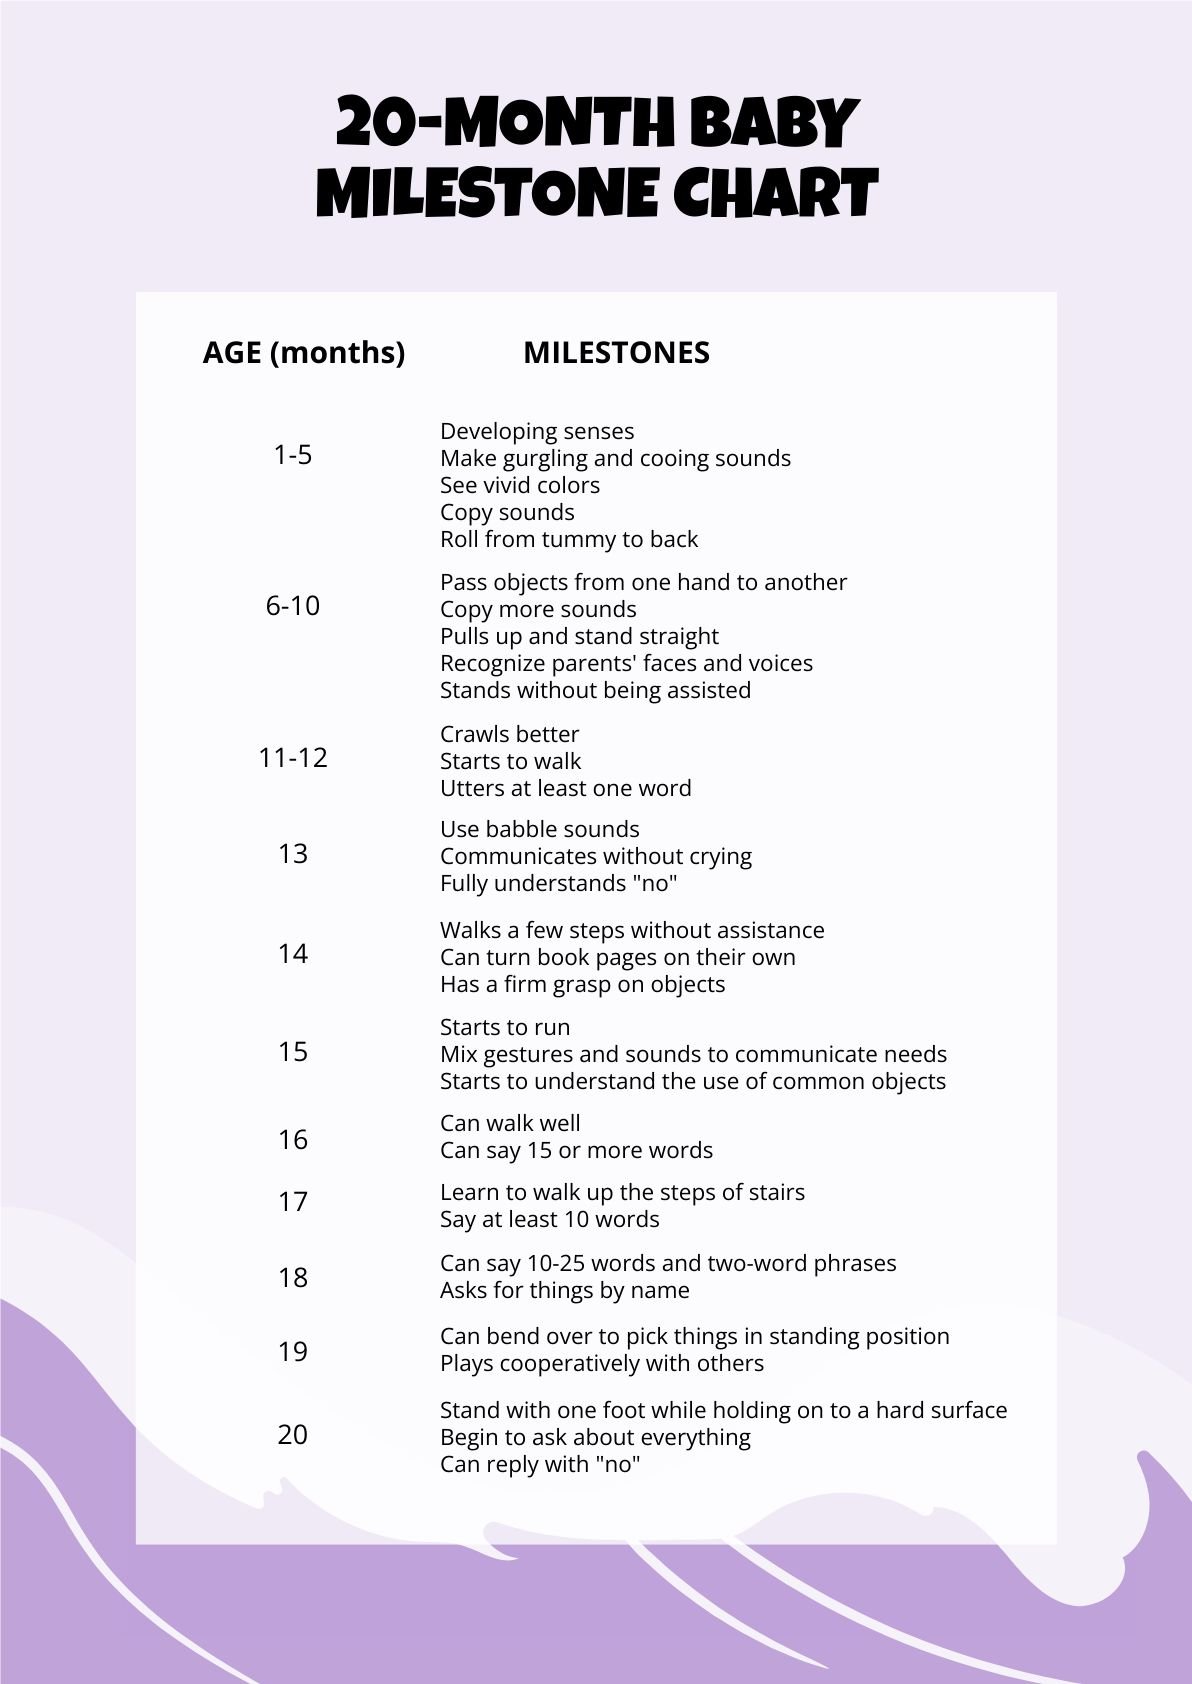 20 Month Baby Milestone Chart in PDF